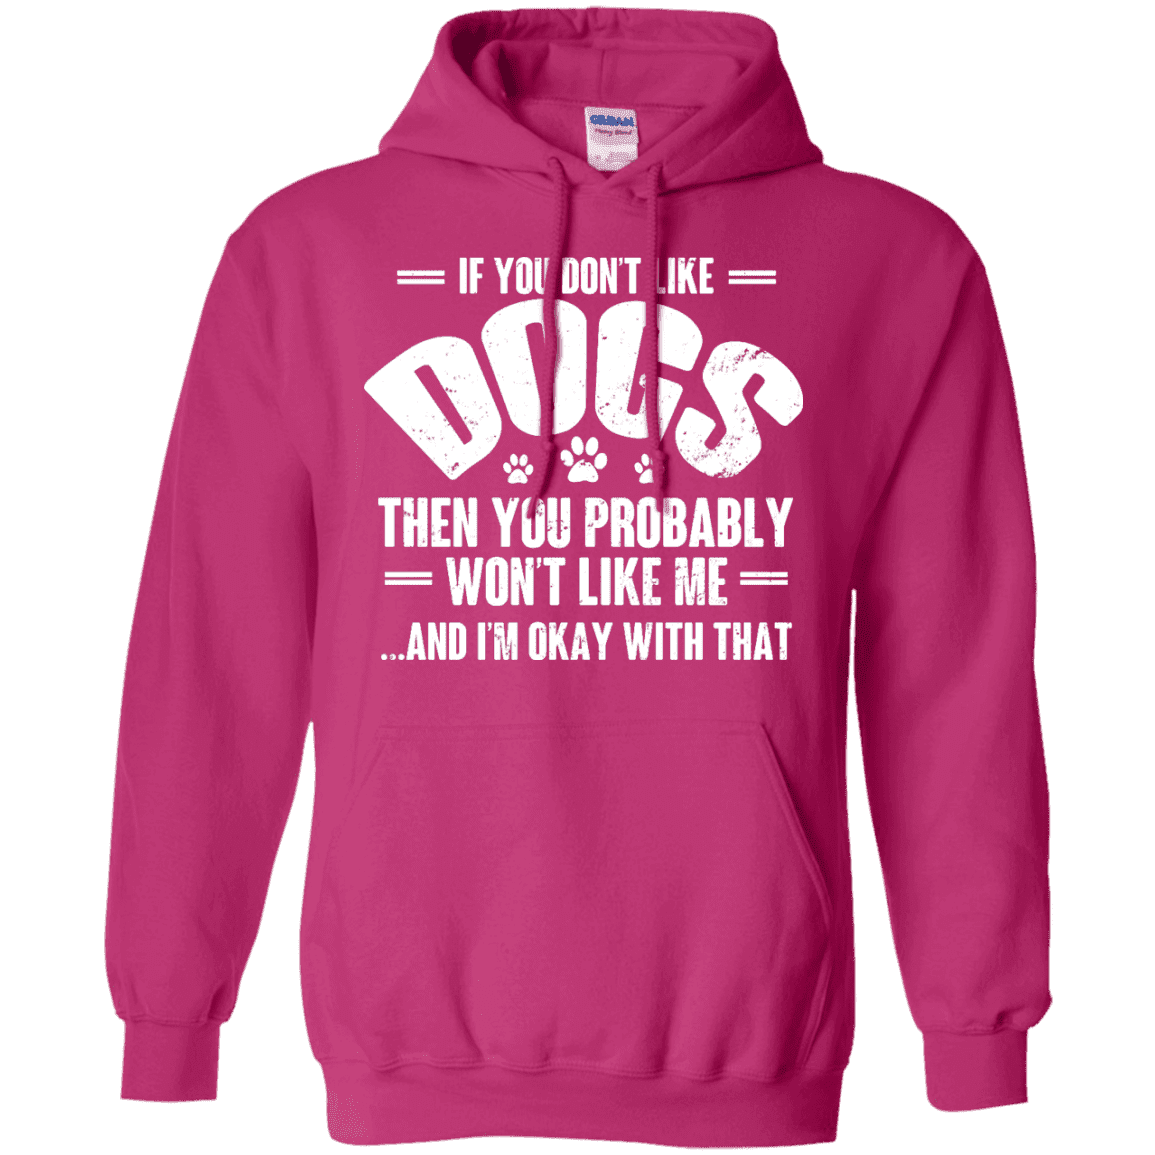 If You Don't Like Dogs - Hoodie.